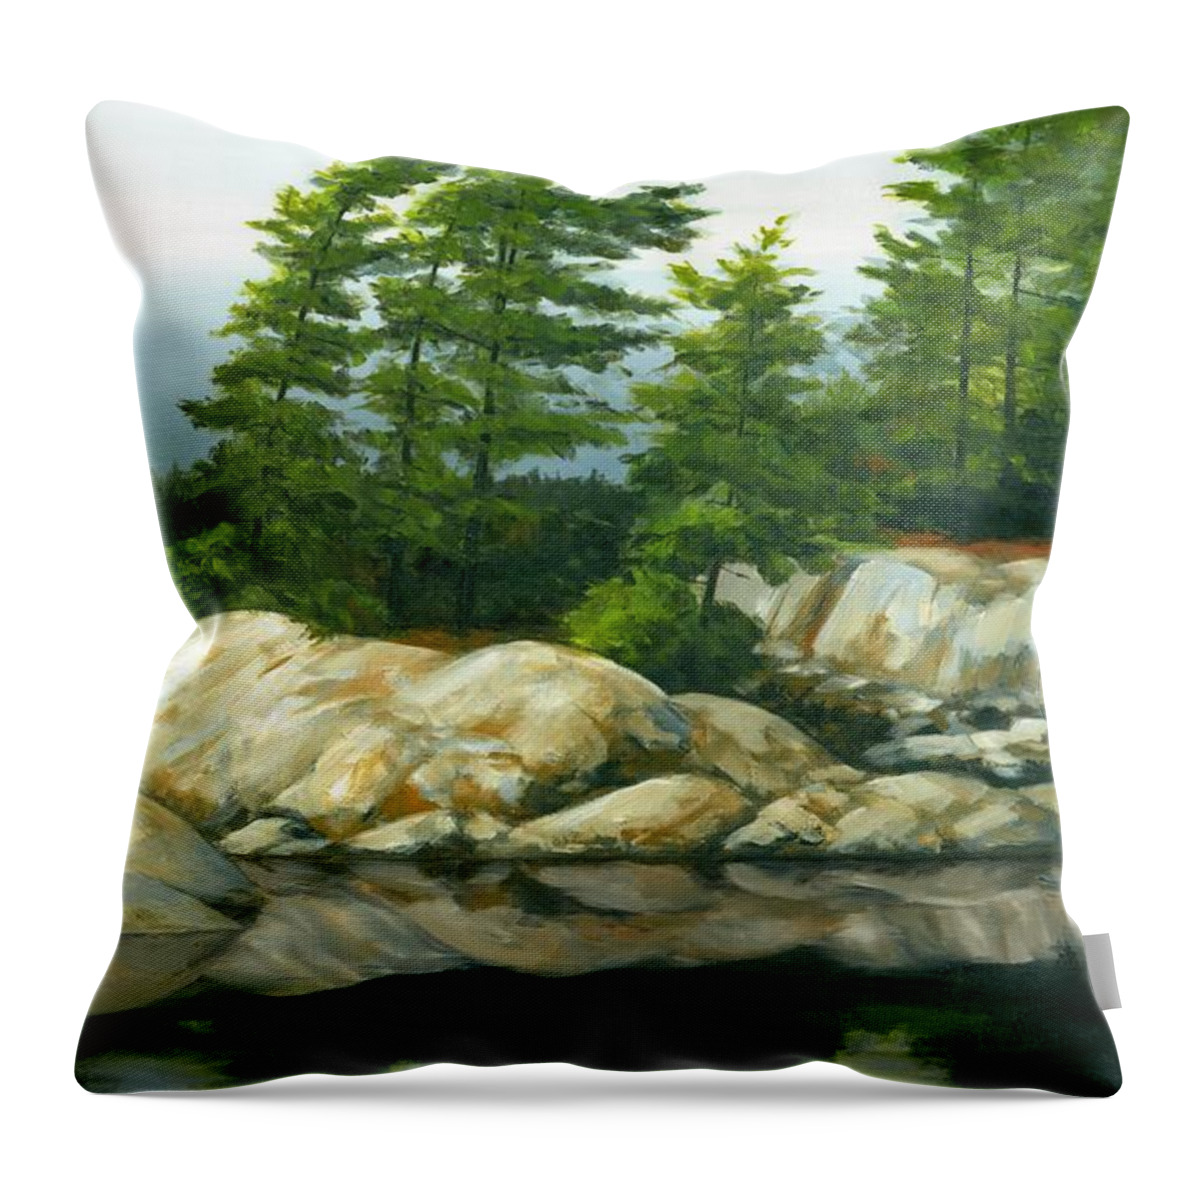 Northern Throw Pillow featuring the painting The Coming Storm by Michael Swanson